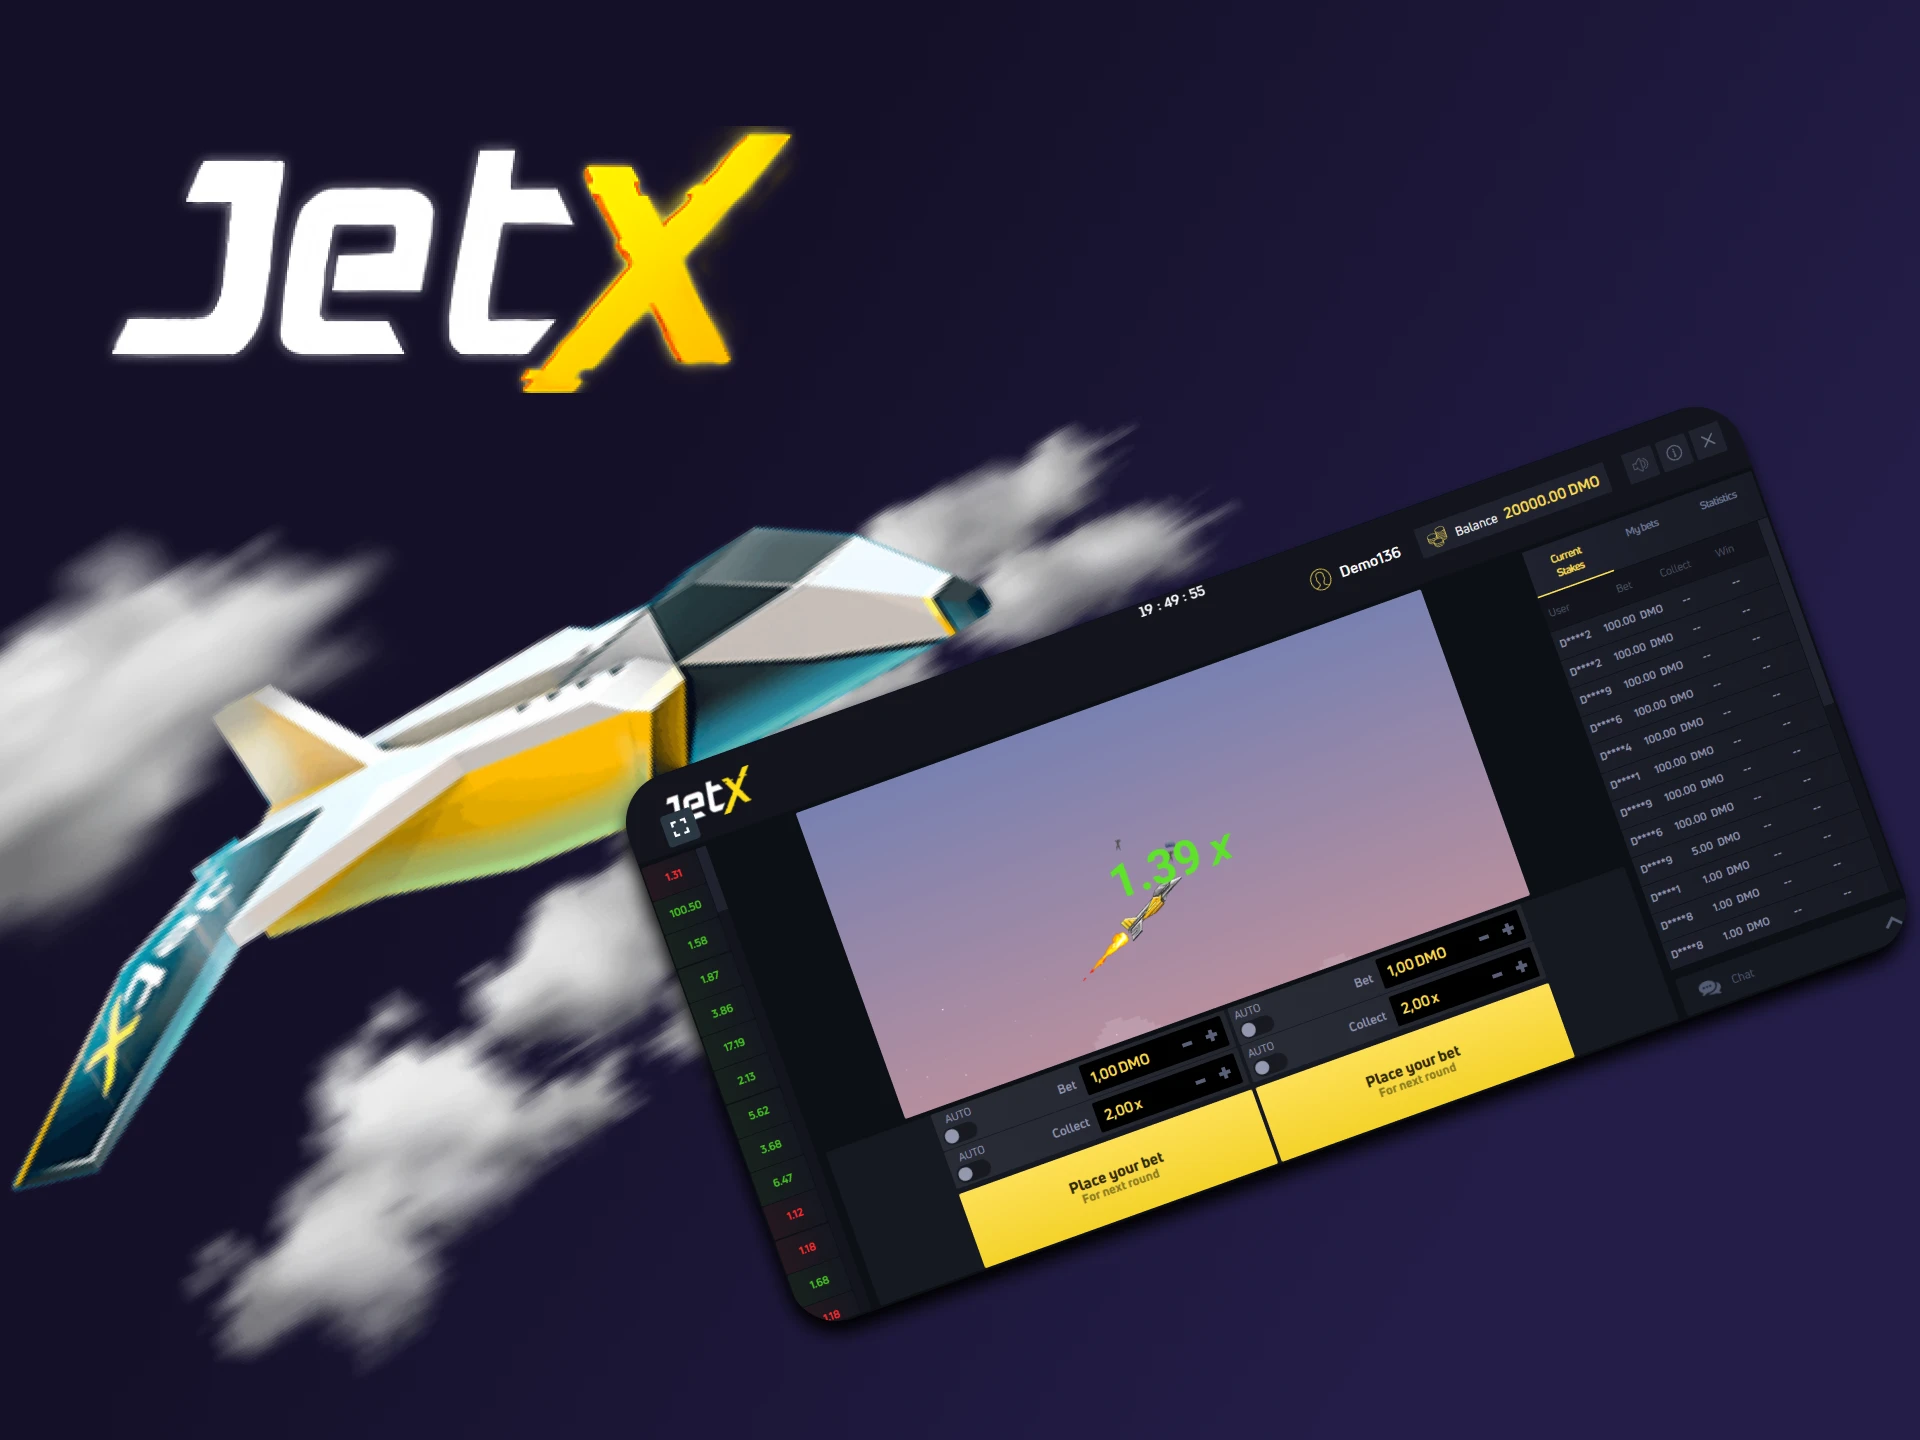 Find out if Lucky Jet is similar to JetX.